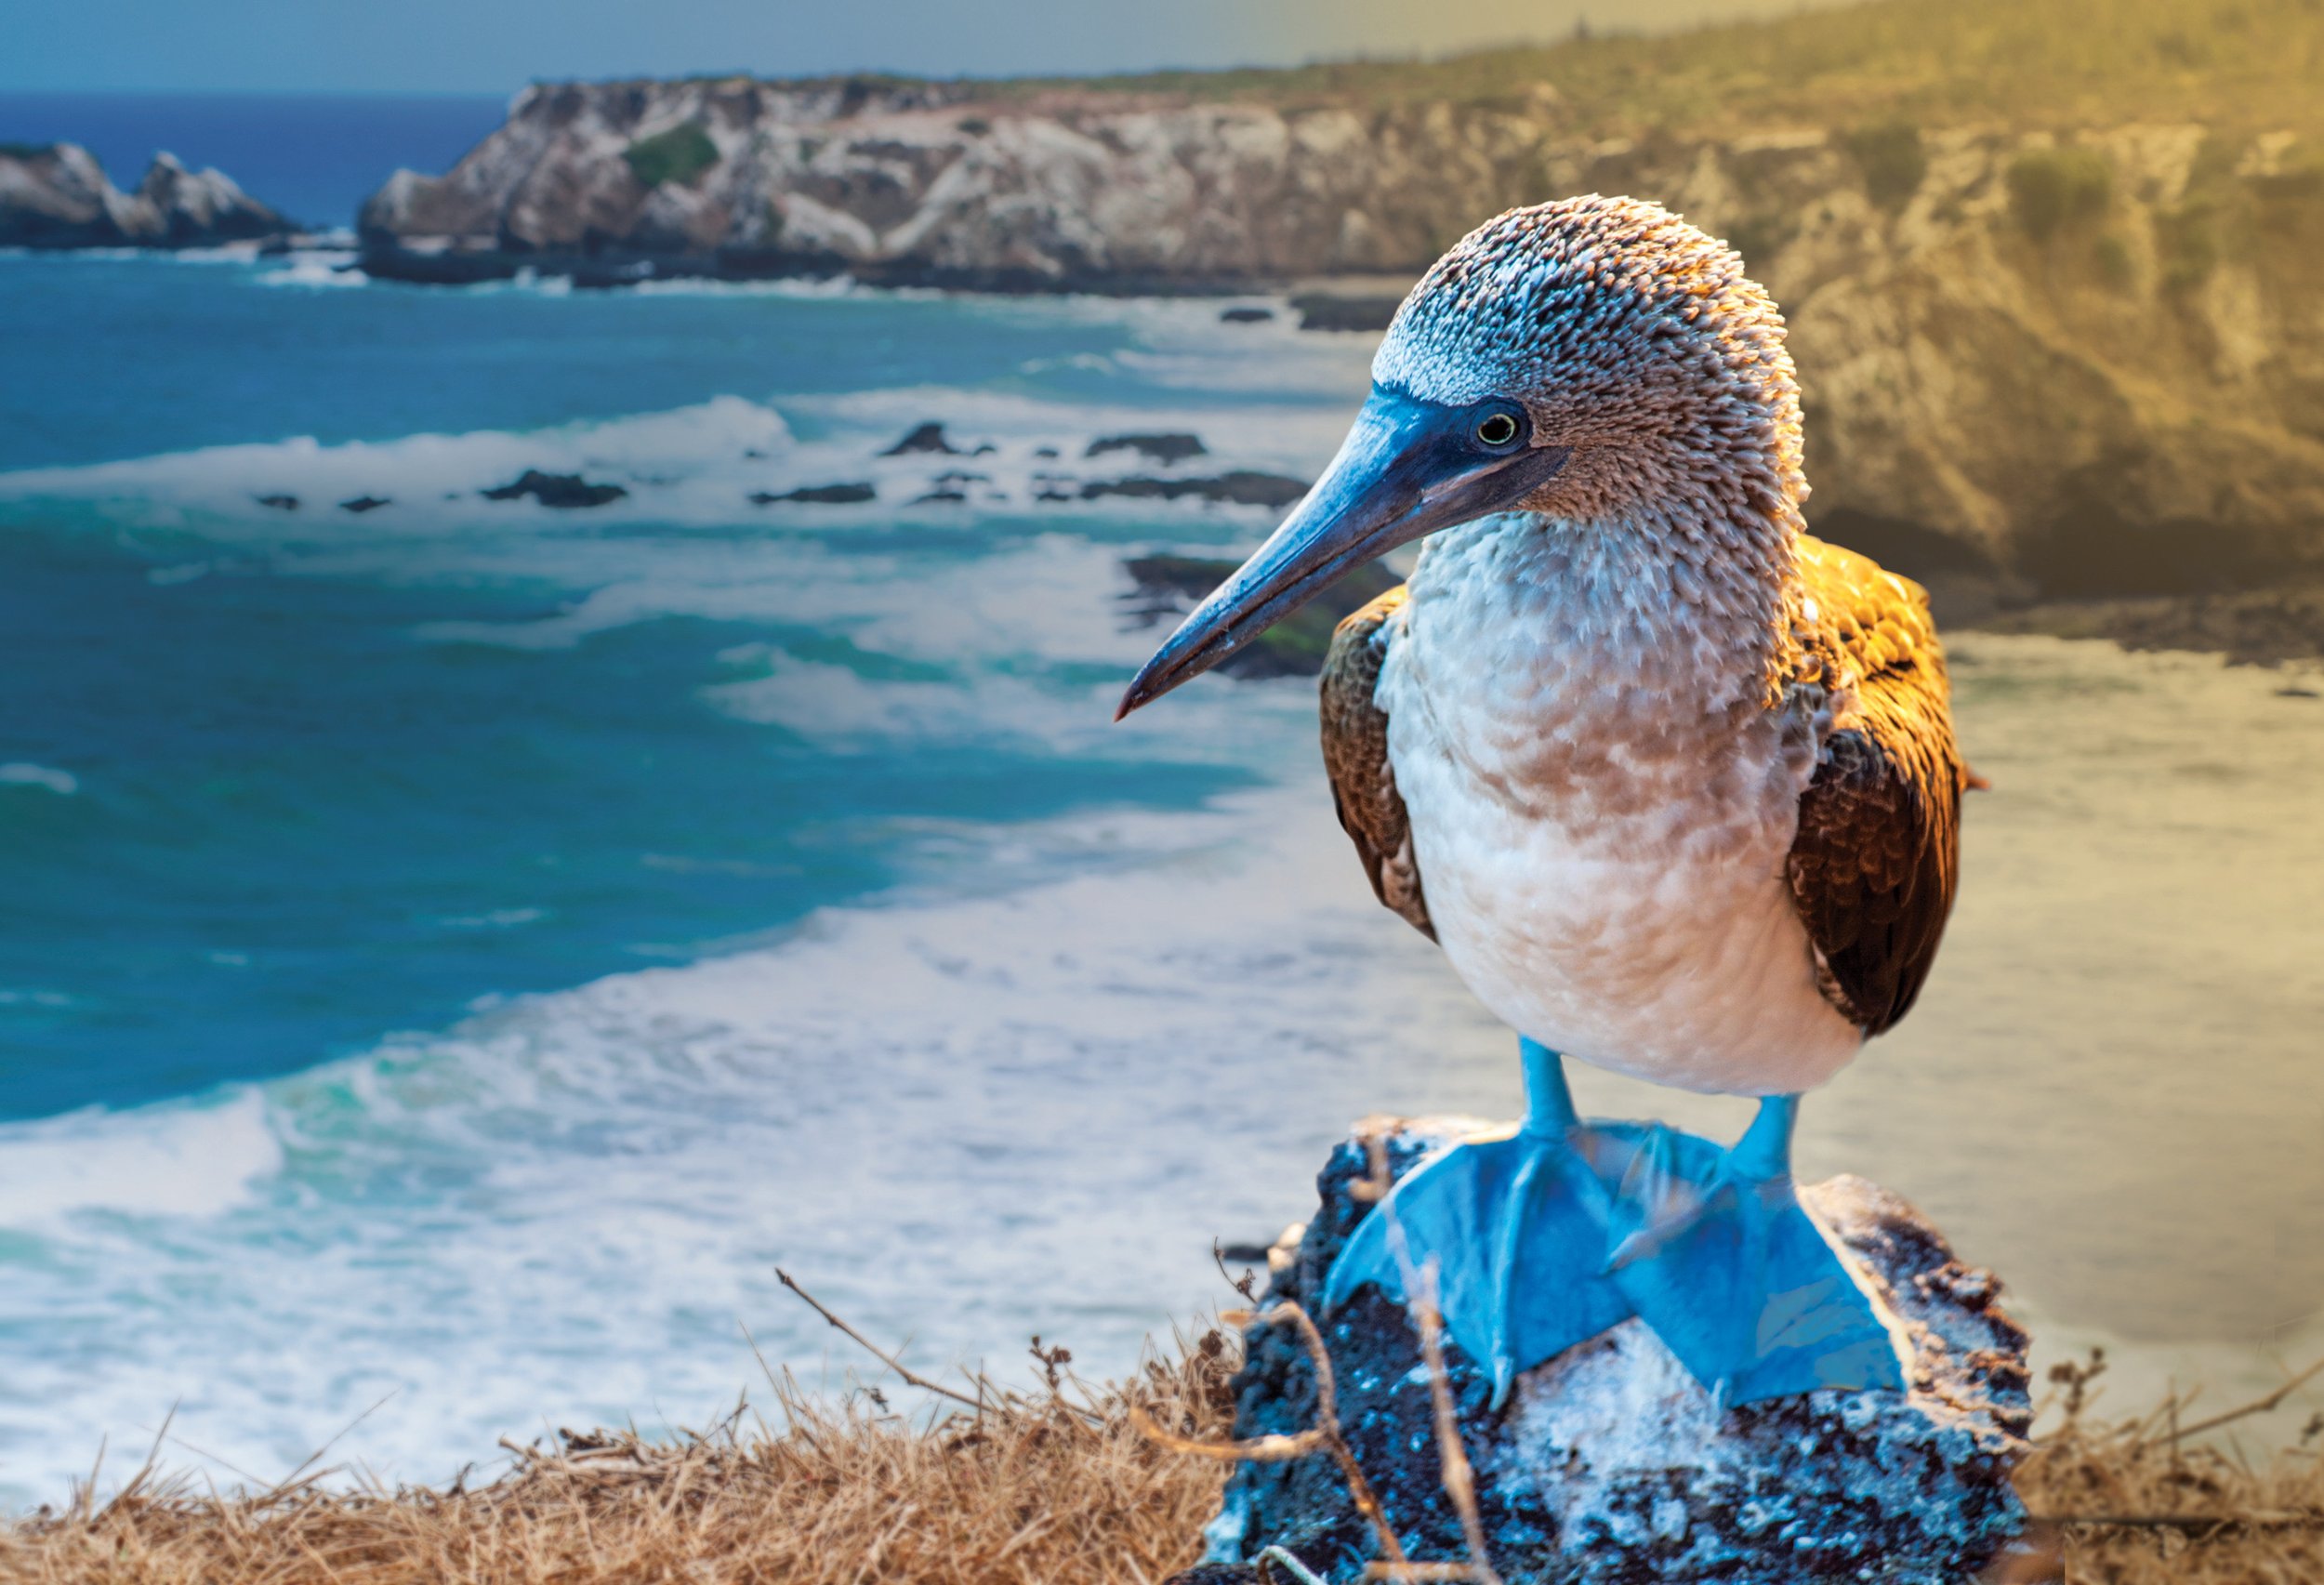 CEL_Galapagos_Blue_Footed_Booby_18.jpeg